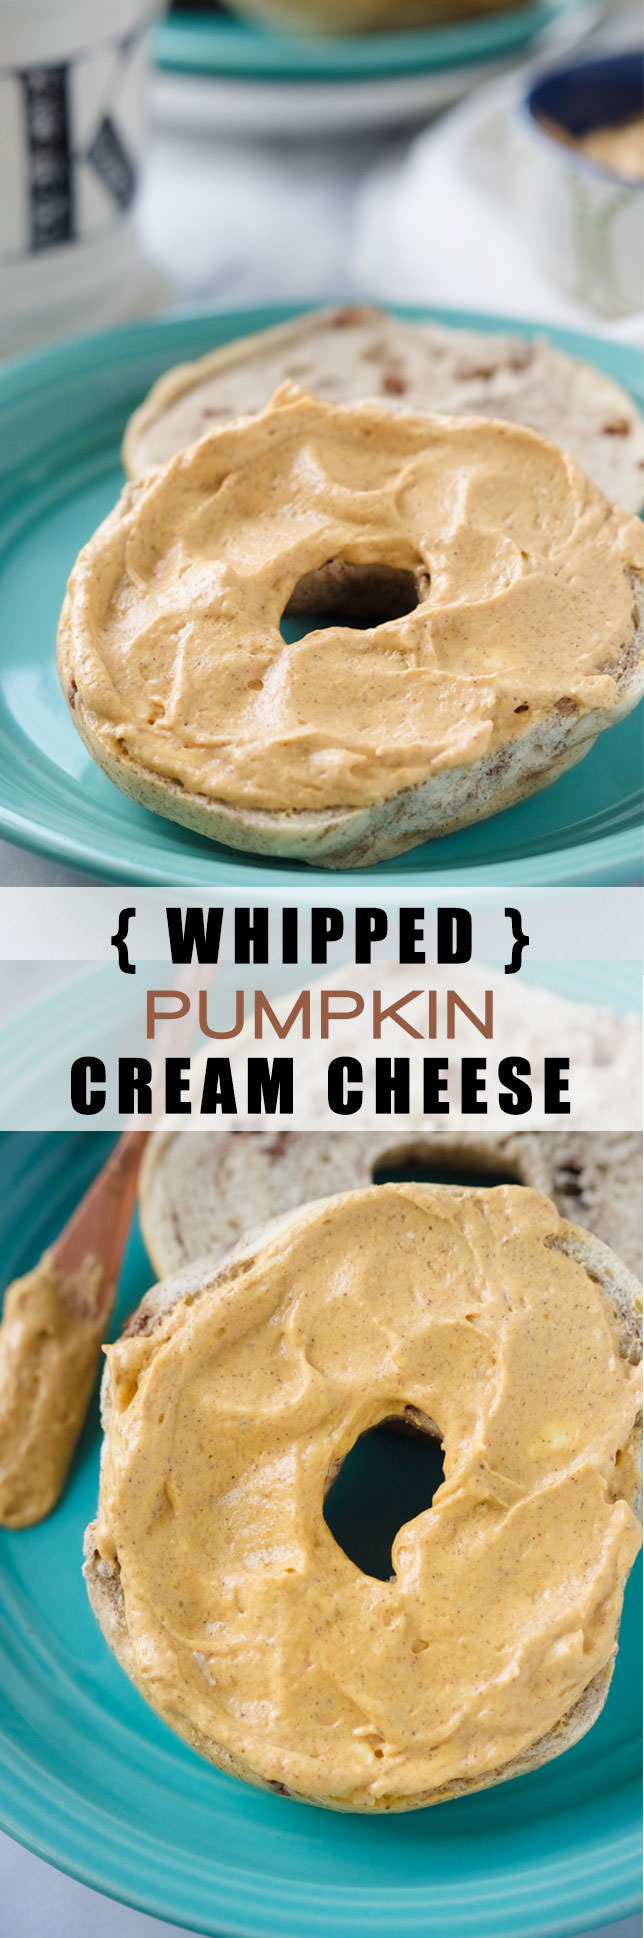 A homemade version of a baker favorite, Pumpkin Whipped Cream Cheese is fluffy, light and makes any piece of toast a treat!